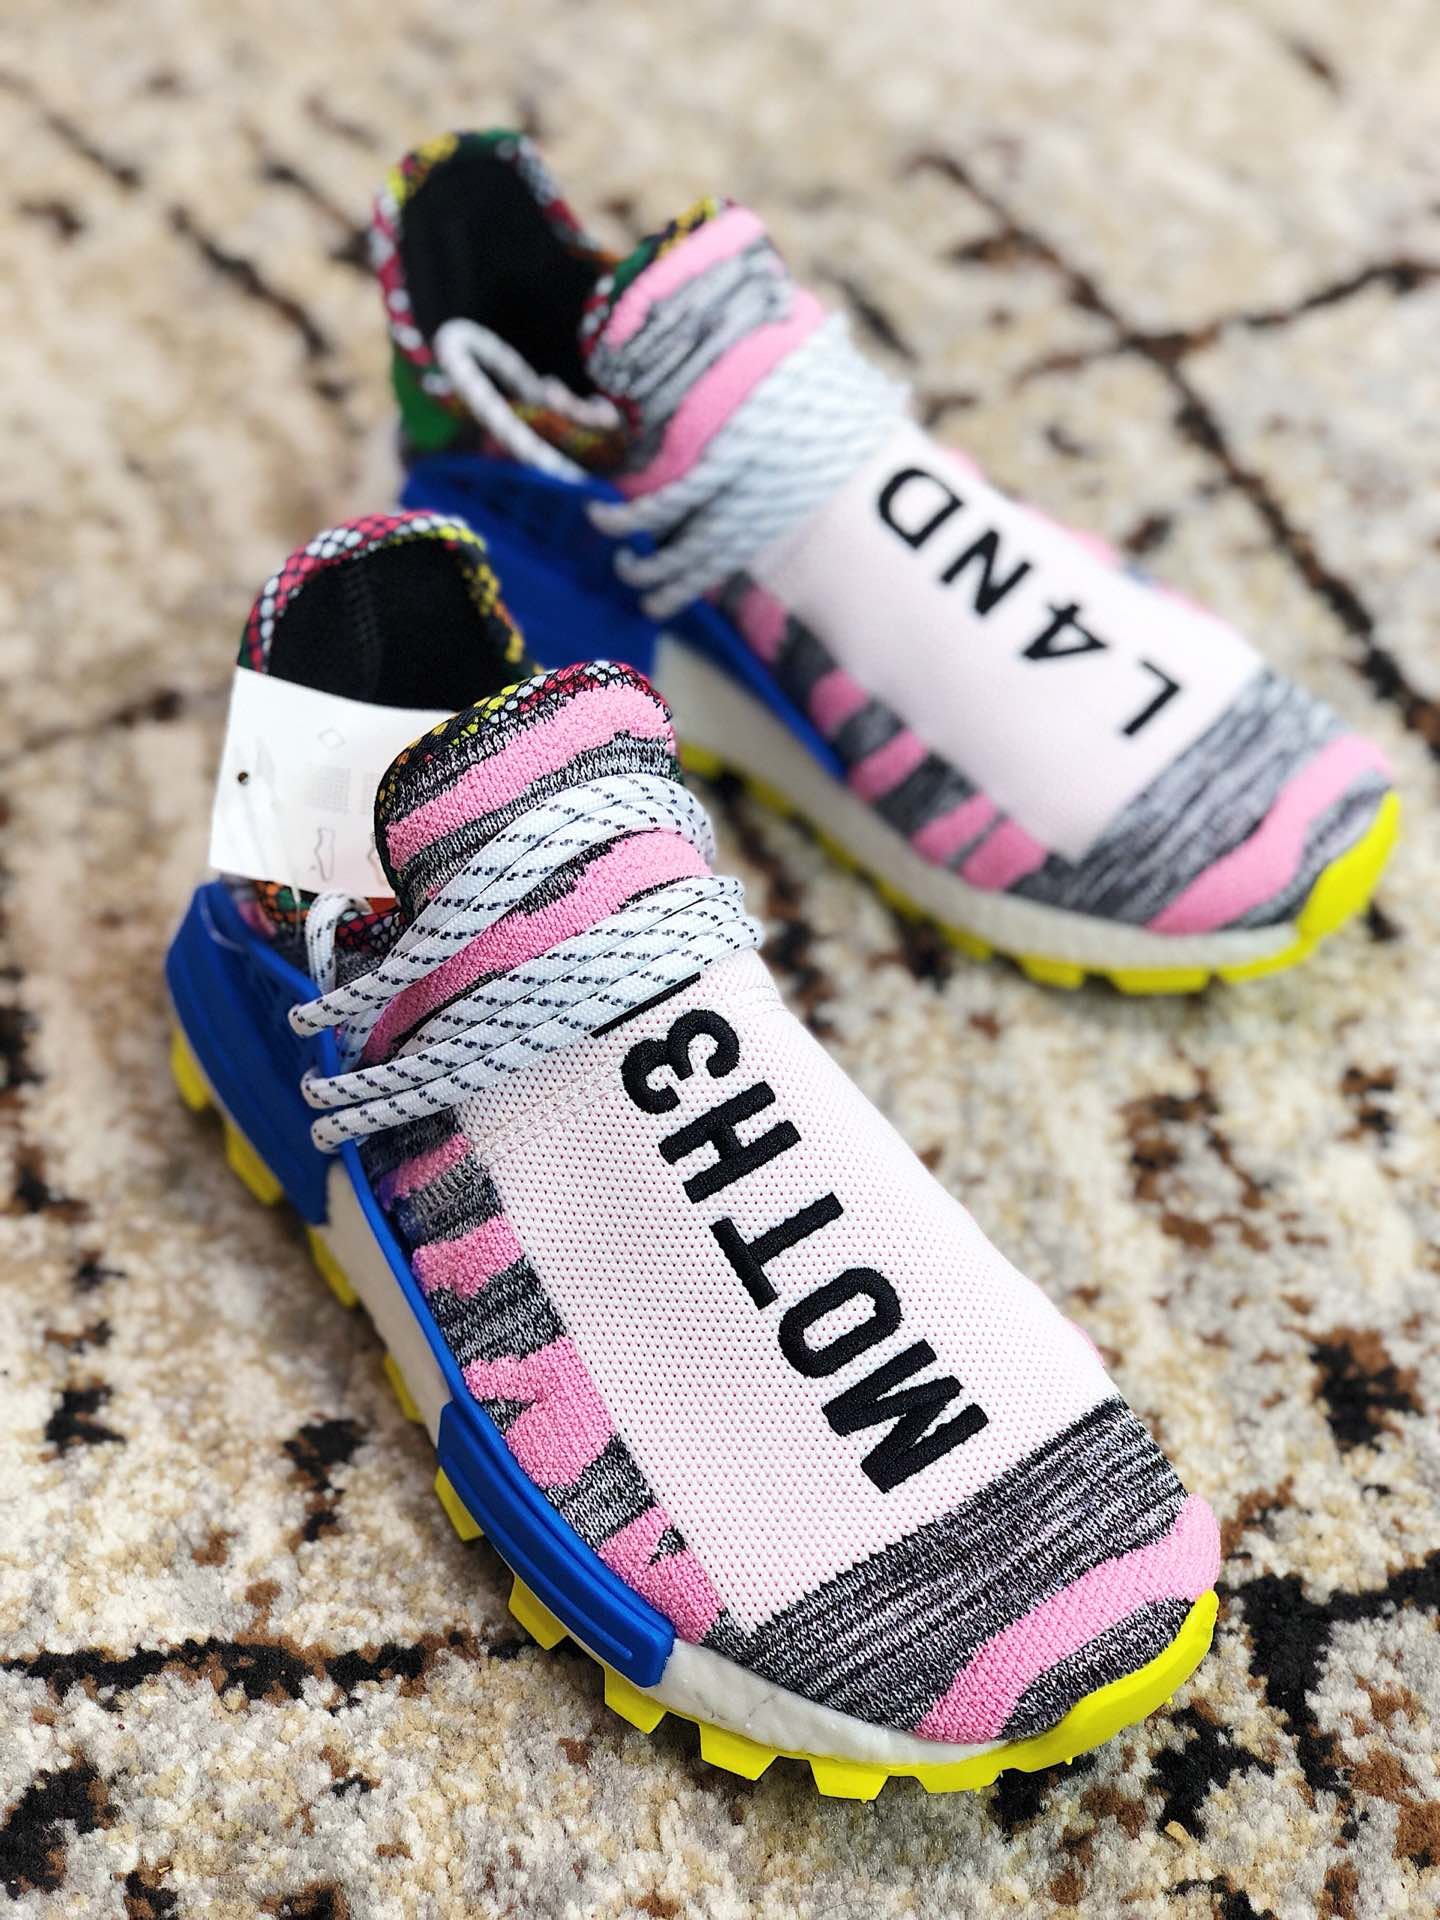 High Quality Retail version Pharrell x Adidas NMD Hu “Solar Pack” Hi-Res Red/Bright Blue BB9531 with fish scale ready